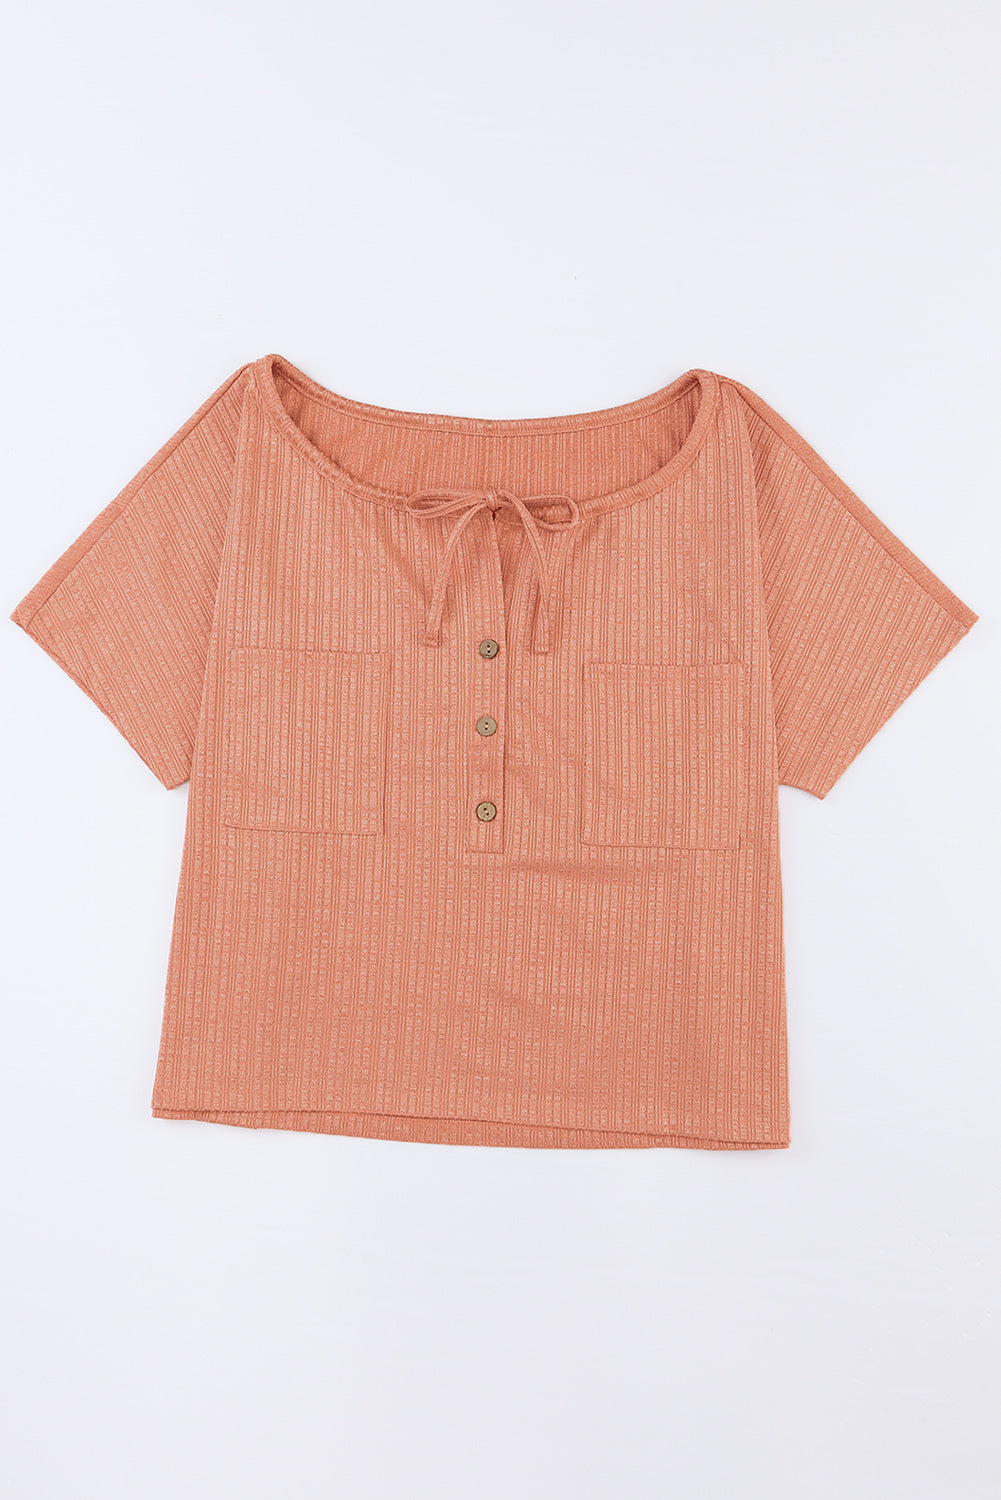 Orange Notched V Neck Buttoned Front Textured Loose Top